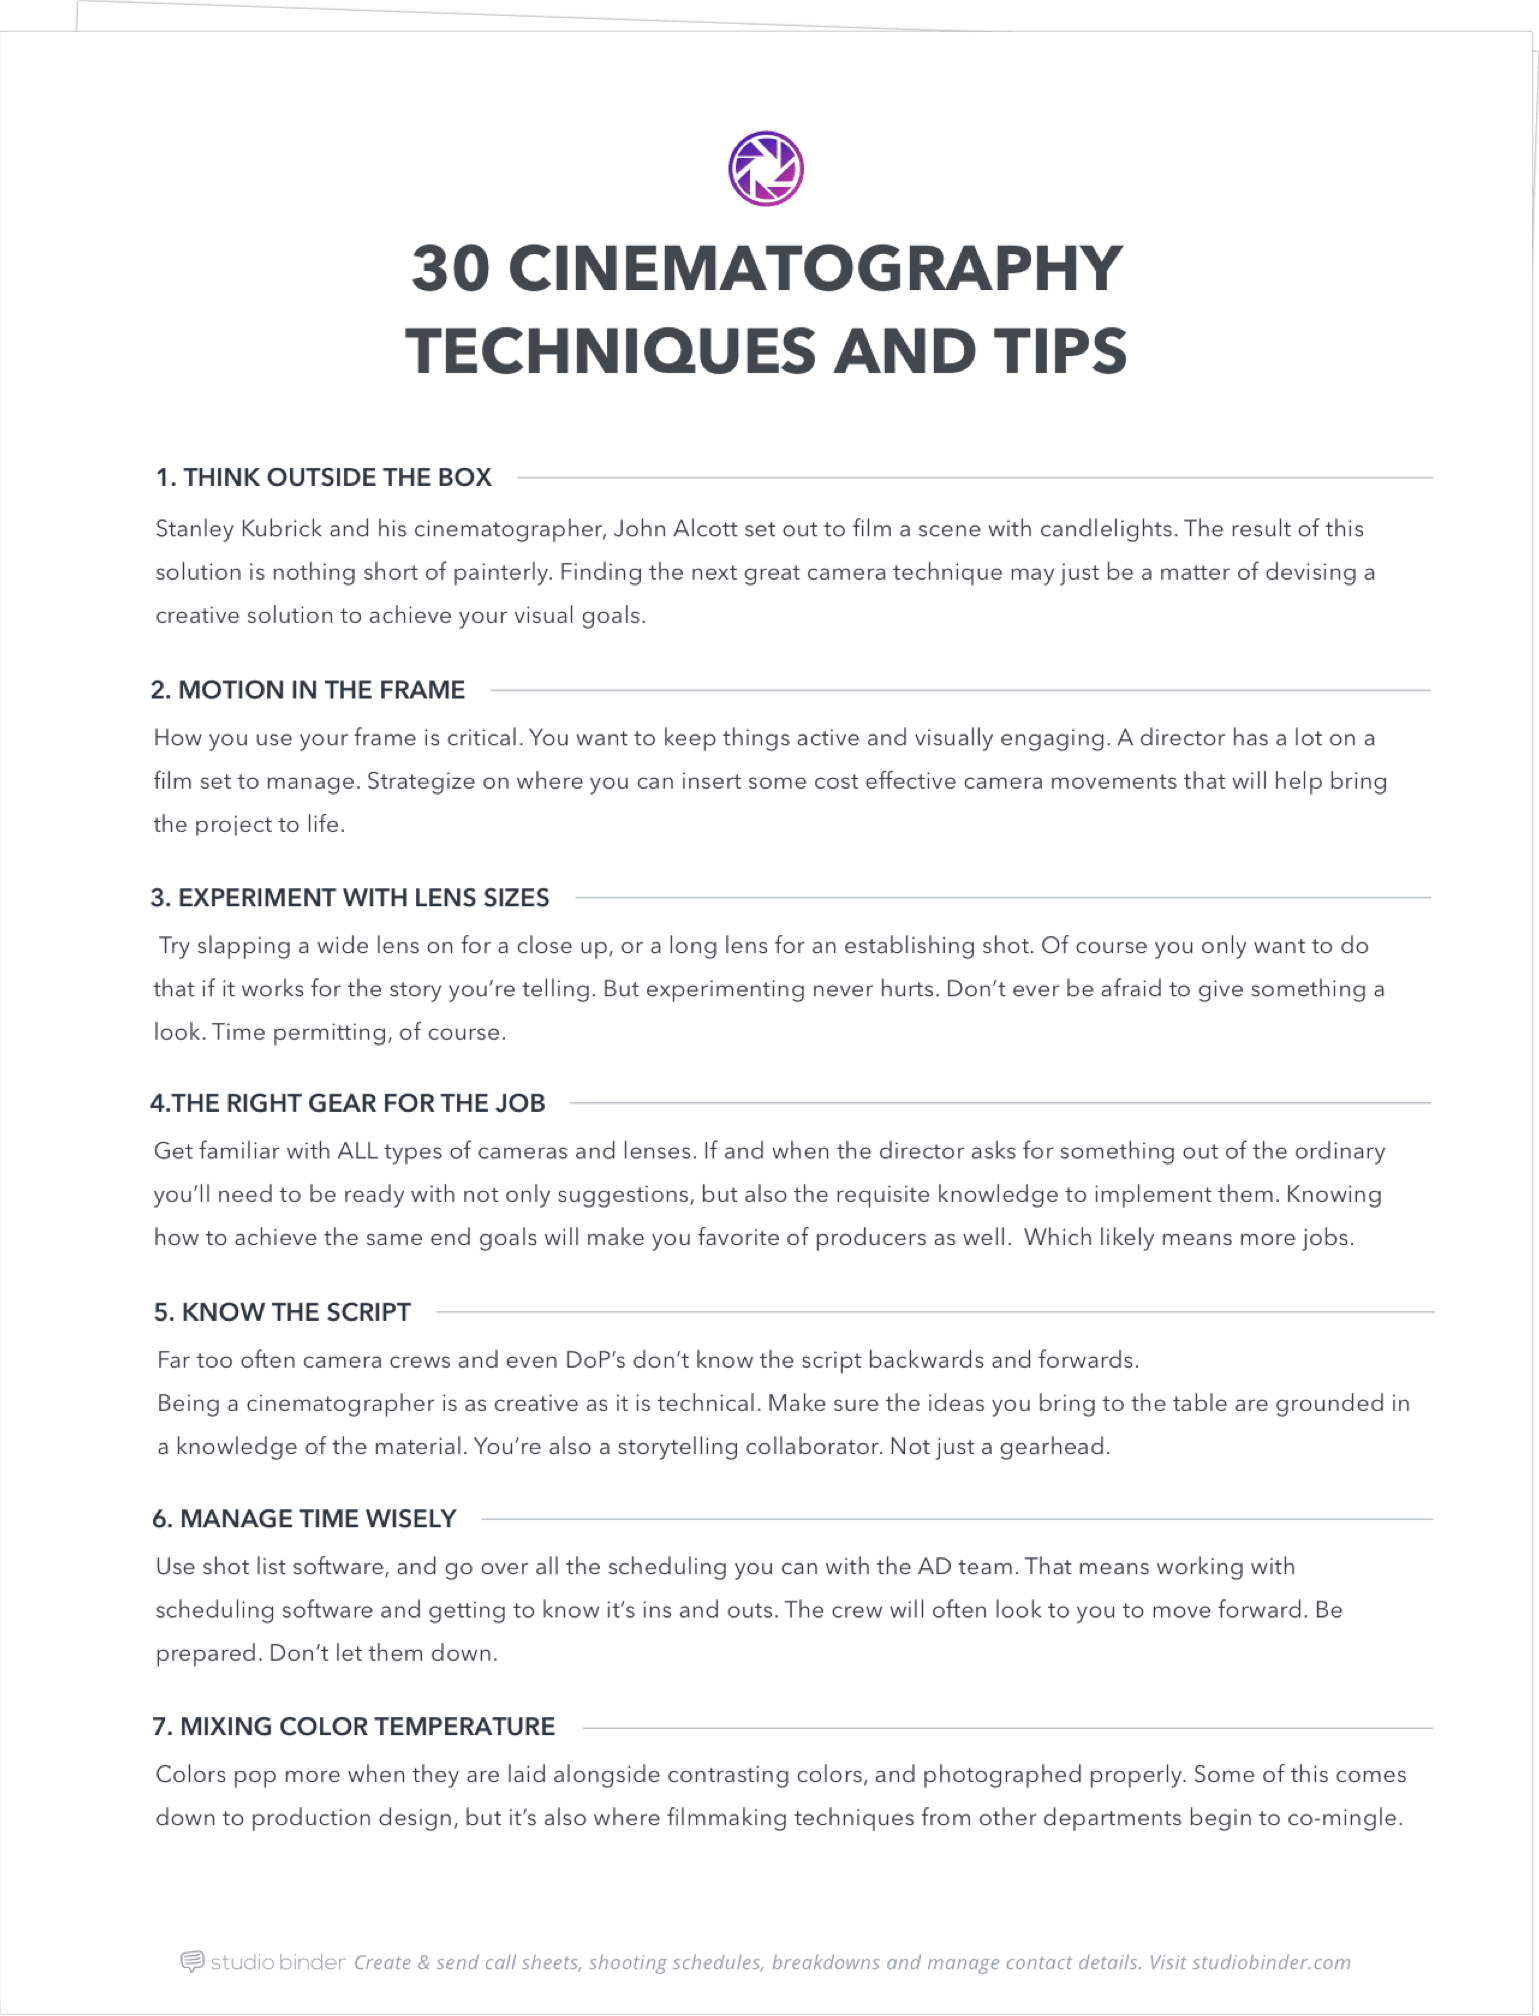 30 Cinematography Techniques and TIps - Exit Intent Full Page - StudioBinder